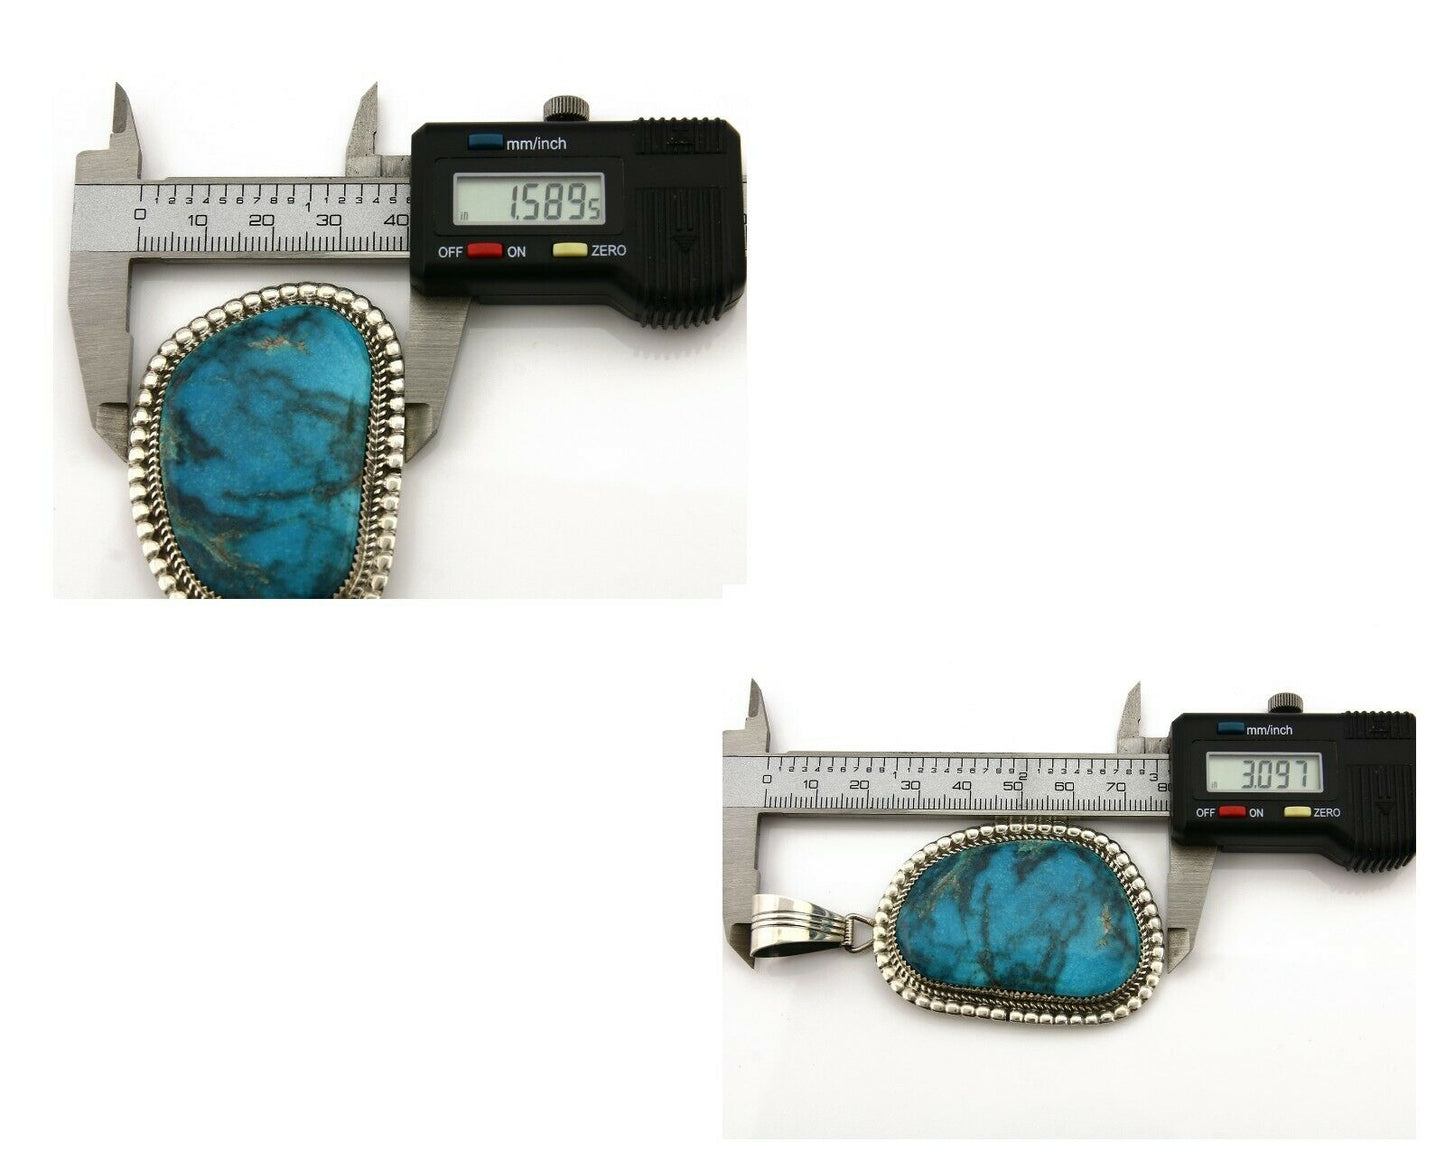 Navajo Pendant .925 Silver Blue Turquoise Signed Artist LTB C.80's